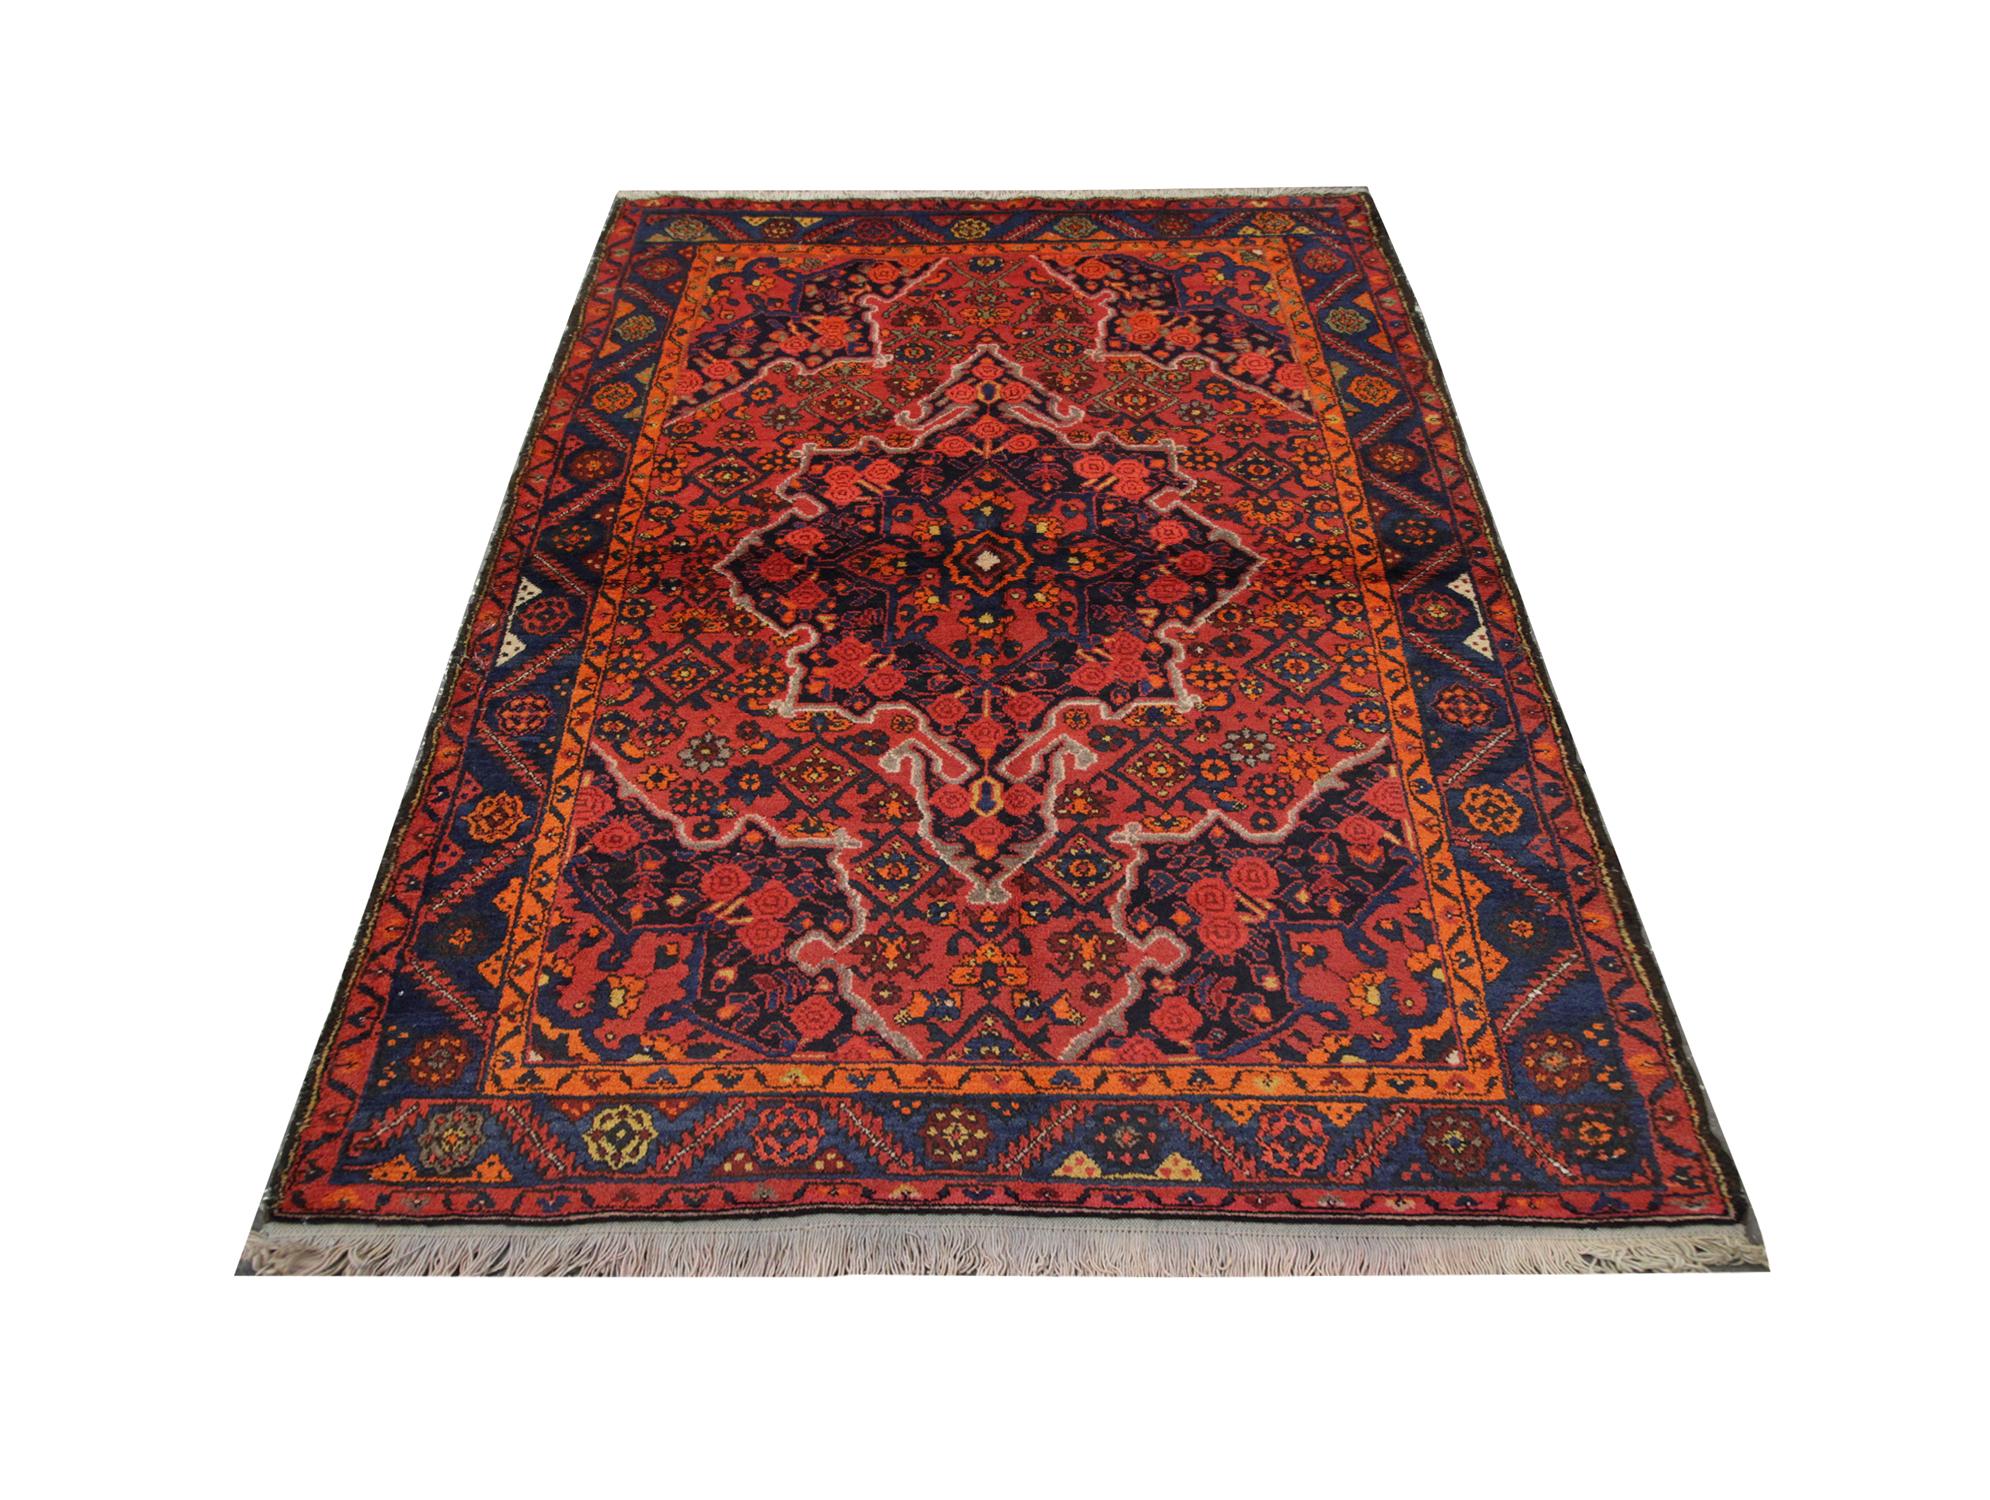 Handmade carpet with rich orange and red colors cover this high-quality Antique Karabagh rug. Hand-woven in 1950 with hand-spun, vegetable-dyed wool, and cotton, by some of the finest Caucasian artisans. This exquisite area rug features a highly